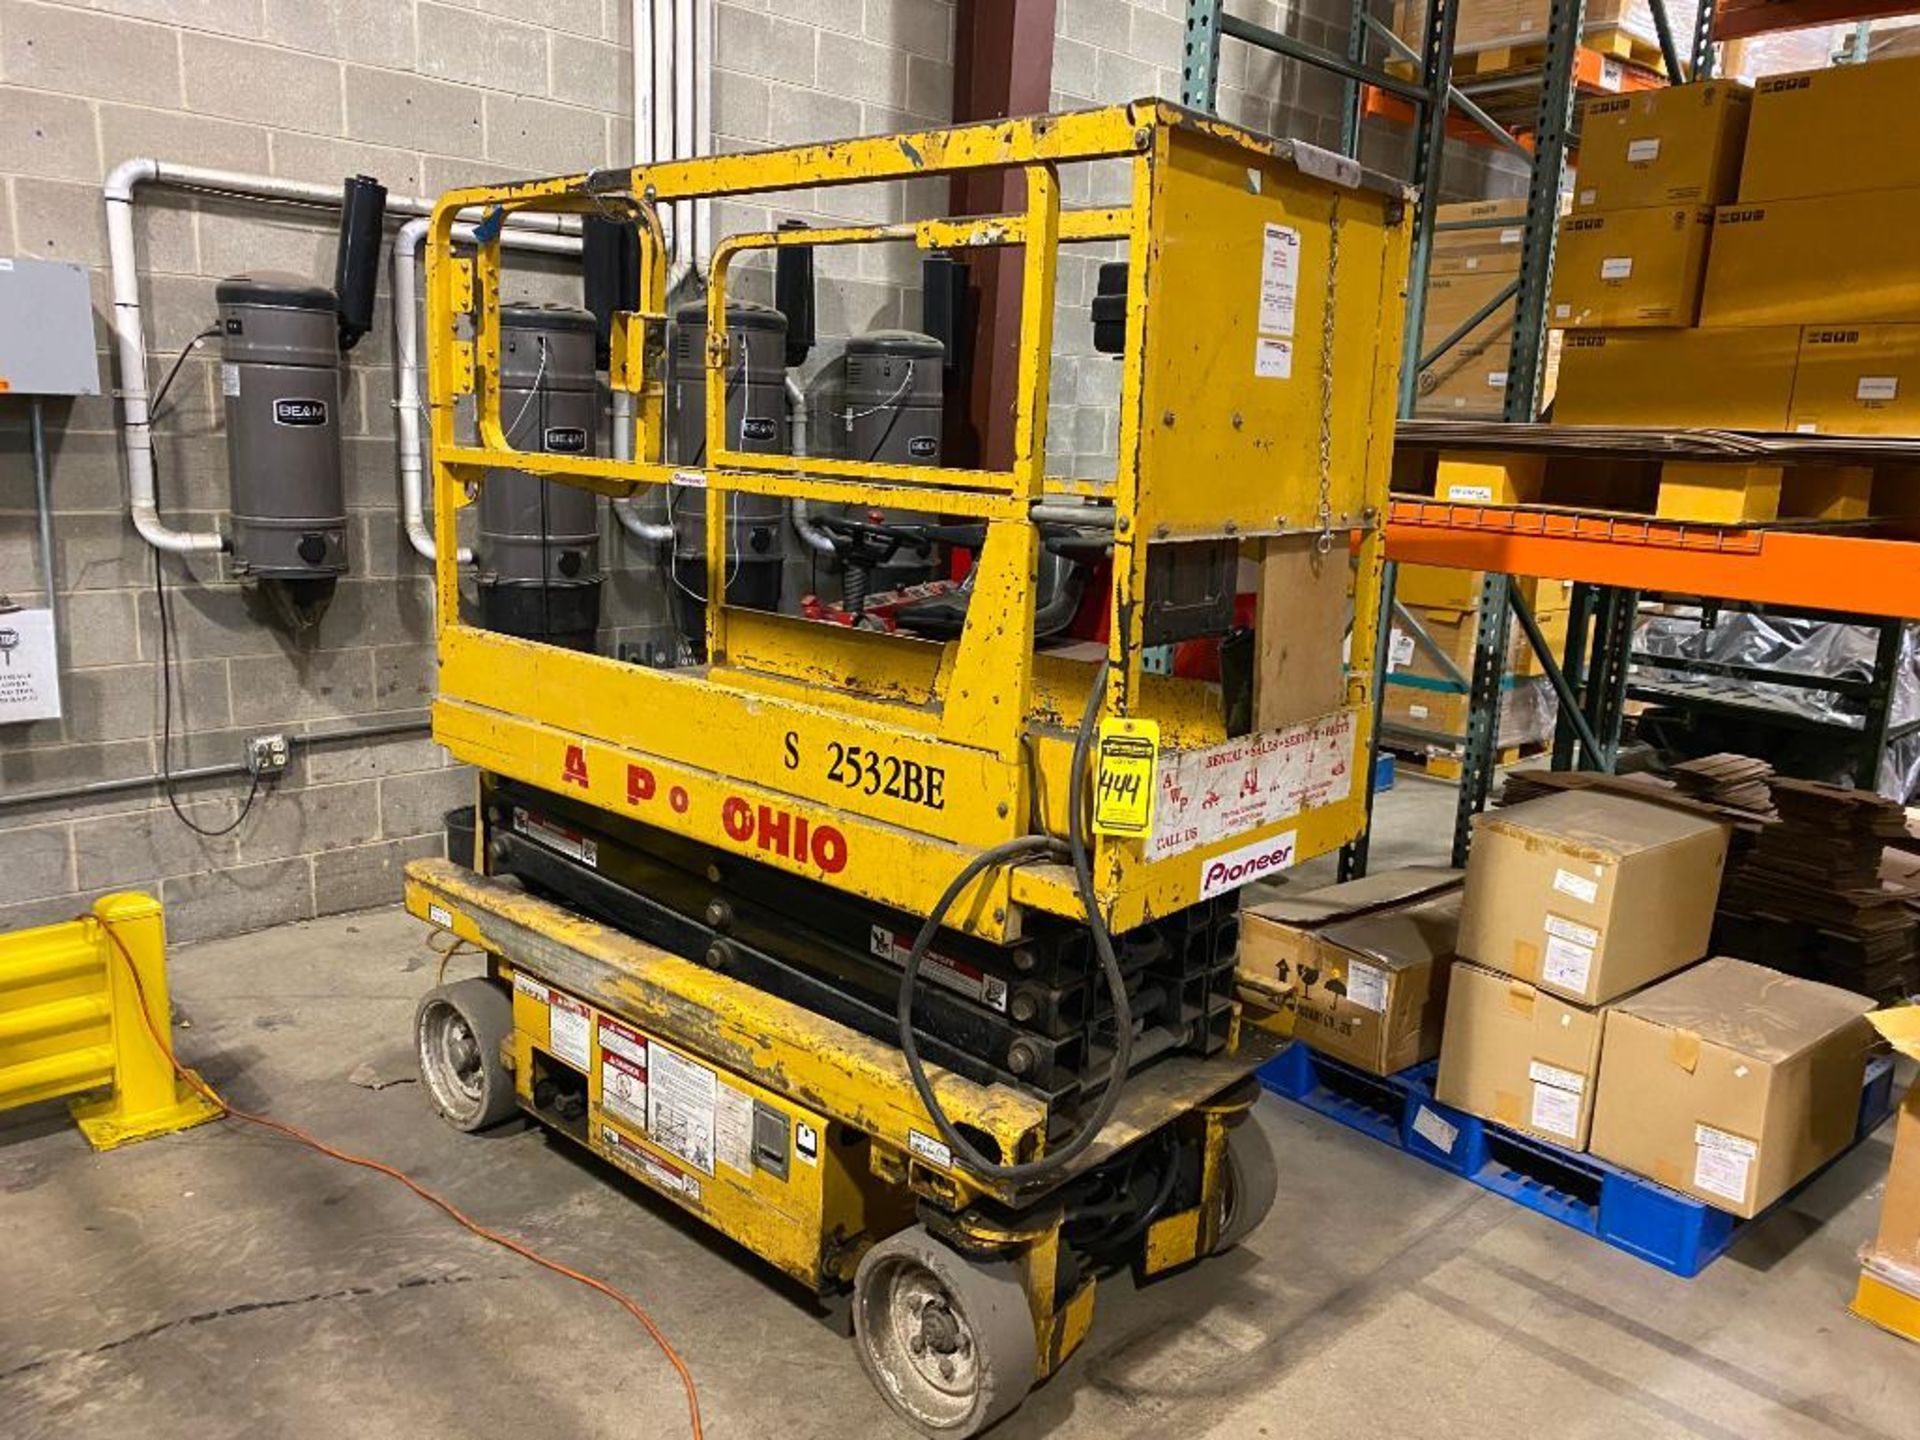 2000 Grove Scissor Lift, Model SM2532BE, S/N 256159, 19' Max. Height, On-Board Charger